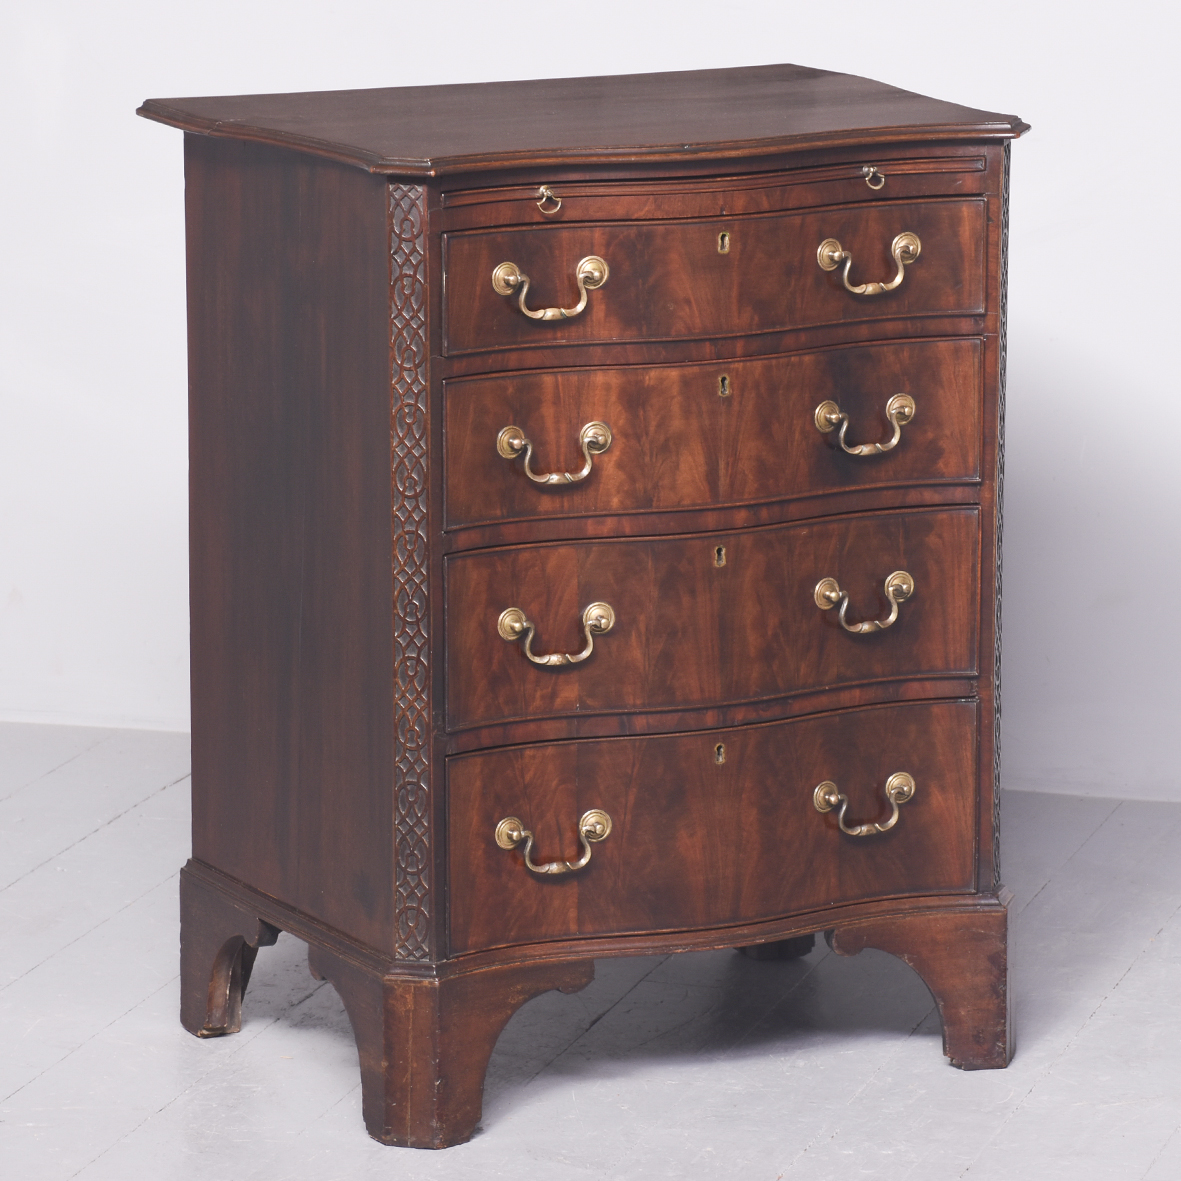 George III Style Neat-Sized, Serpentine-Fronted, Mahogany Chest of Drawers Antique Chest Of Drawers